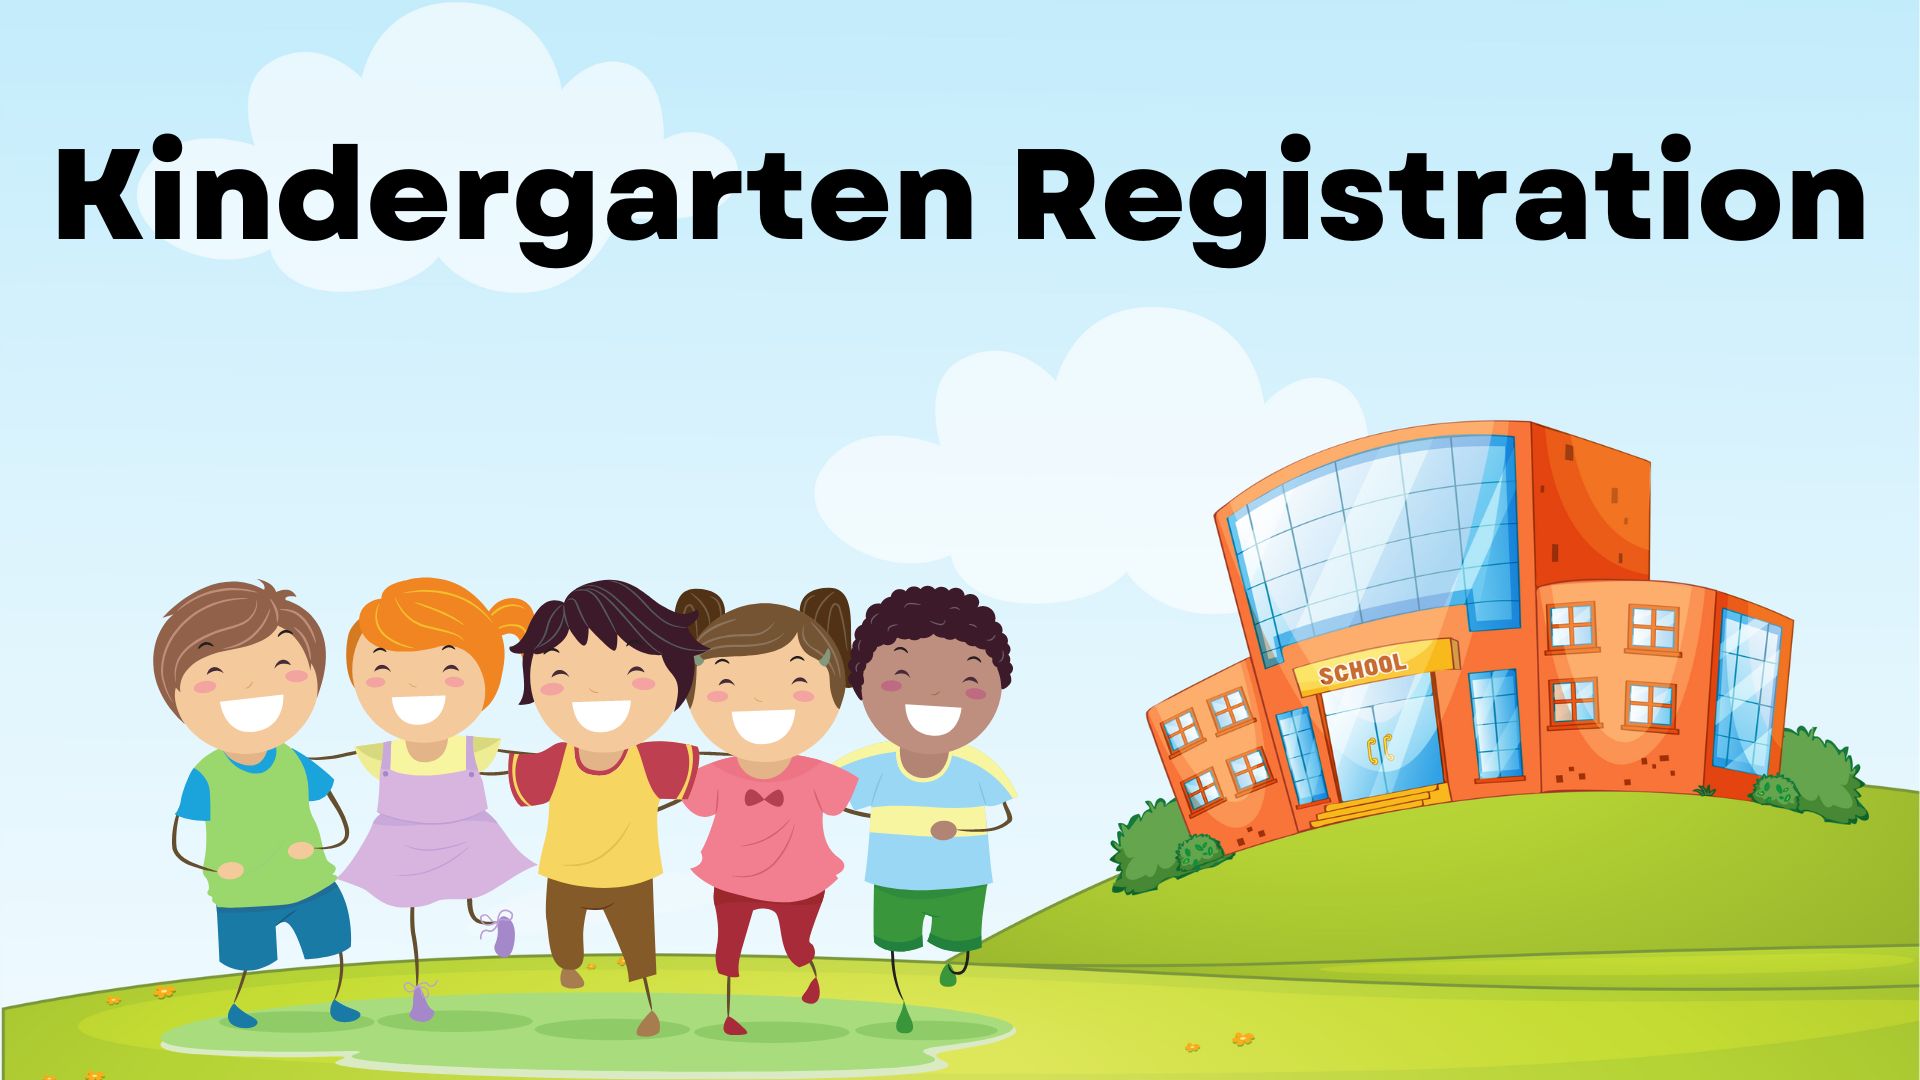 image shows list of things needed for kindergarten registration